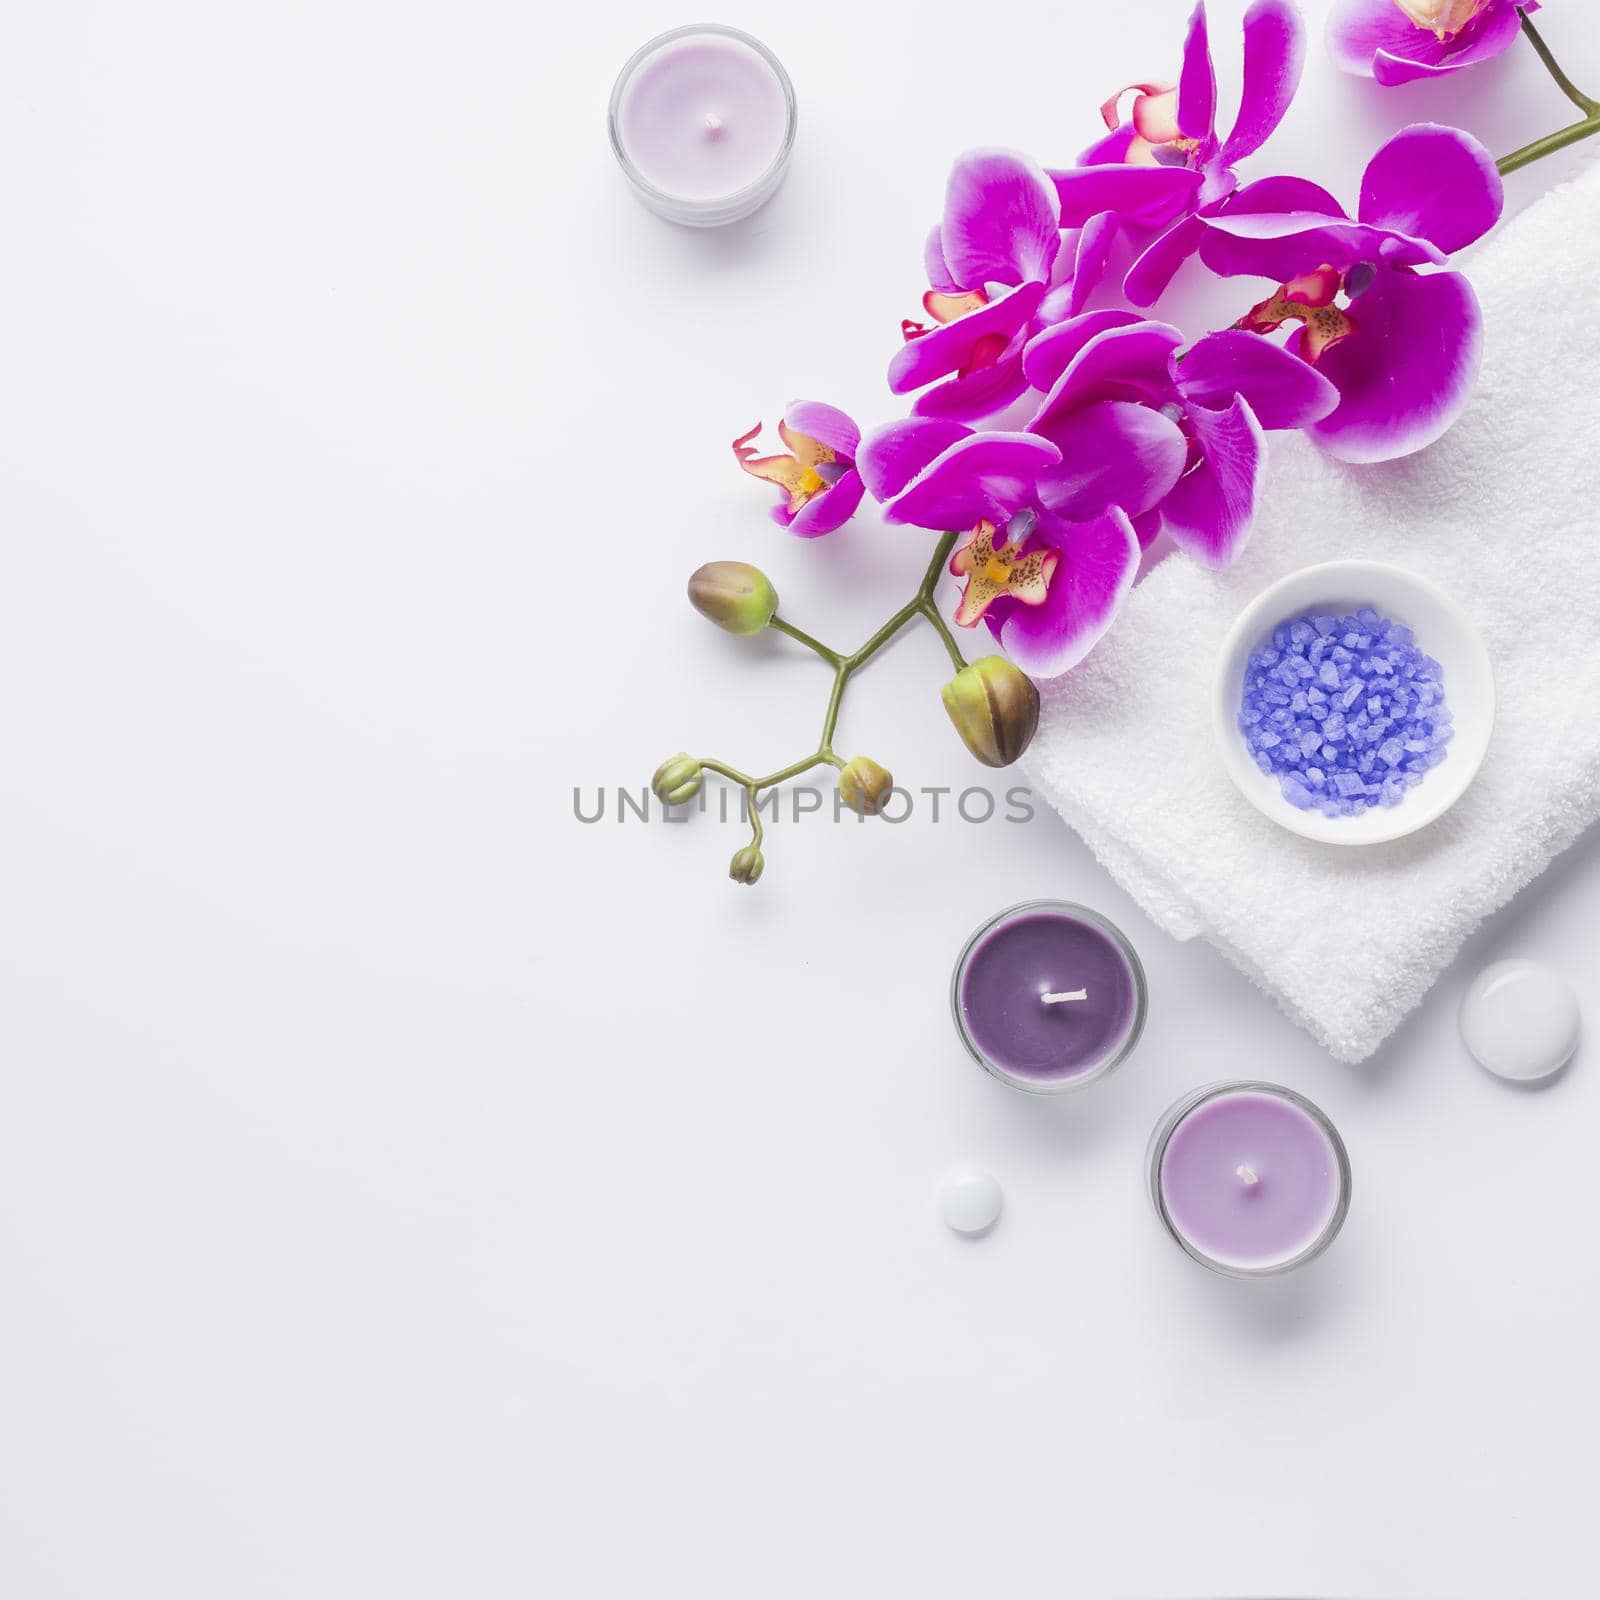 spa still life with beauty products. High quality beautiful photo concept by Zahard